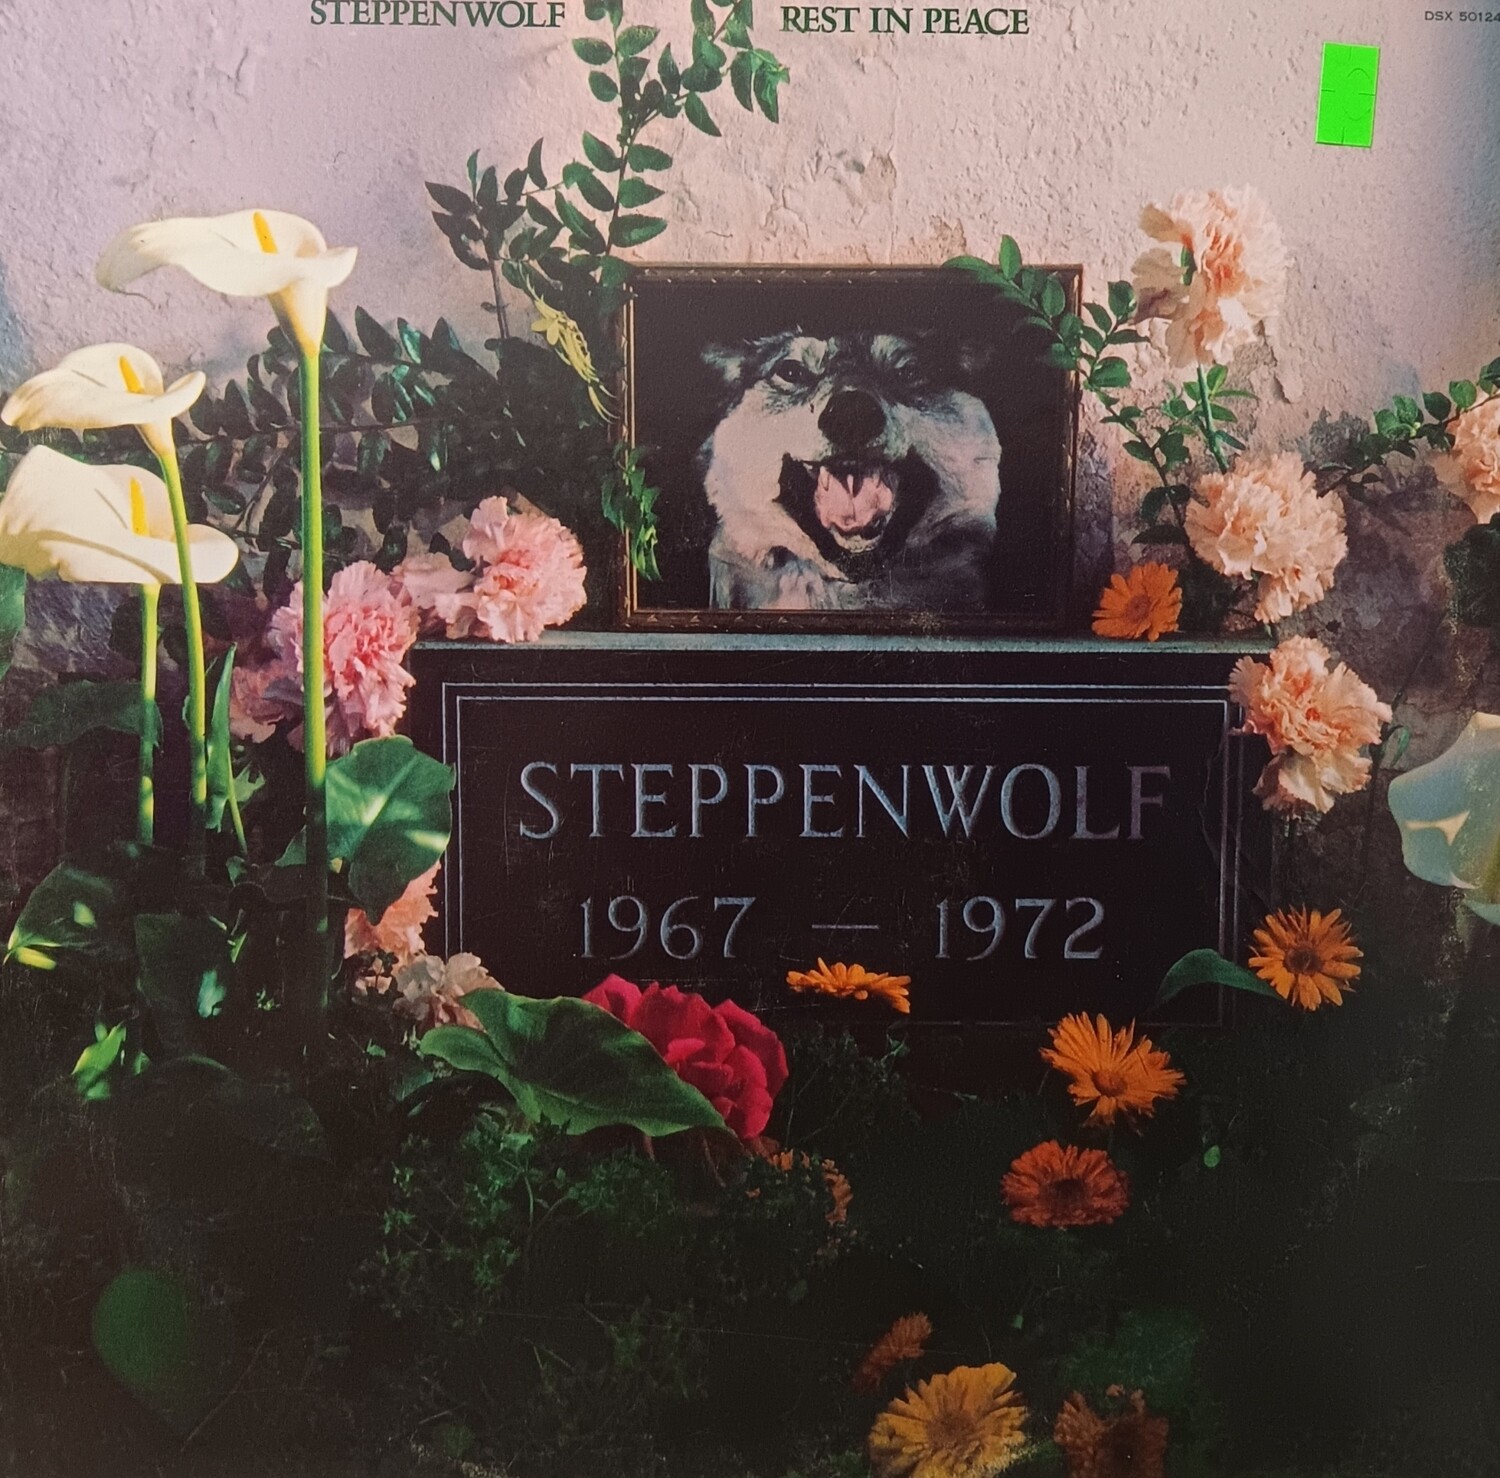 STEPPENWOLF - Rest in peace